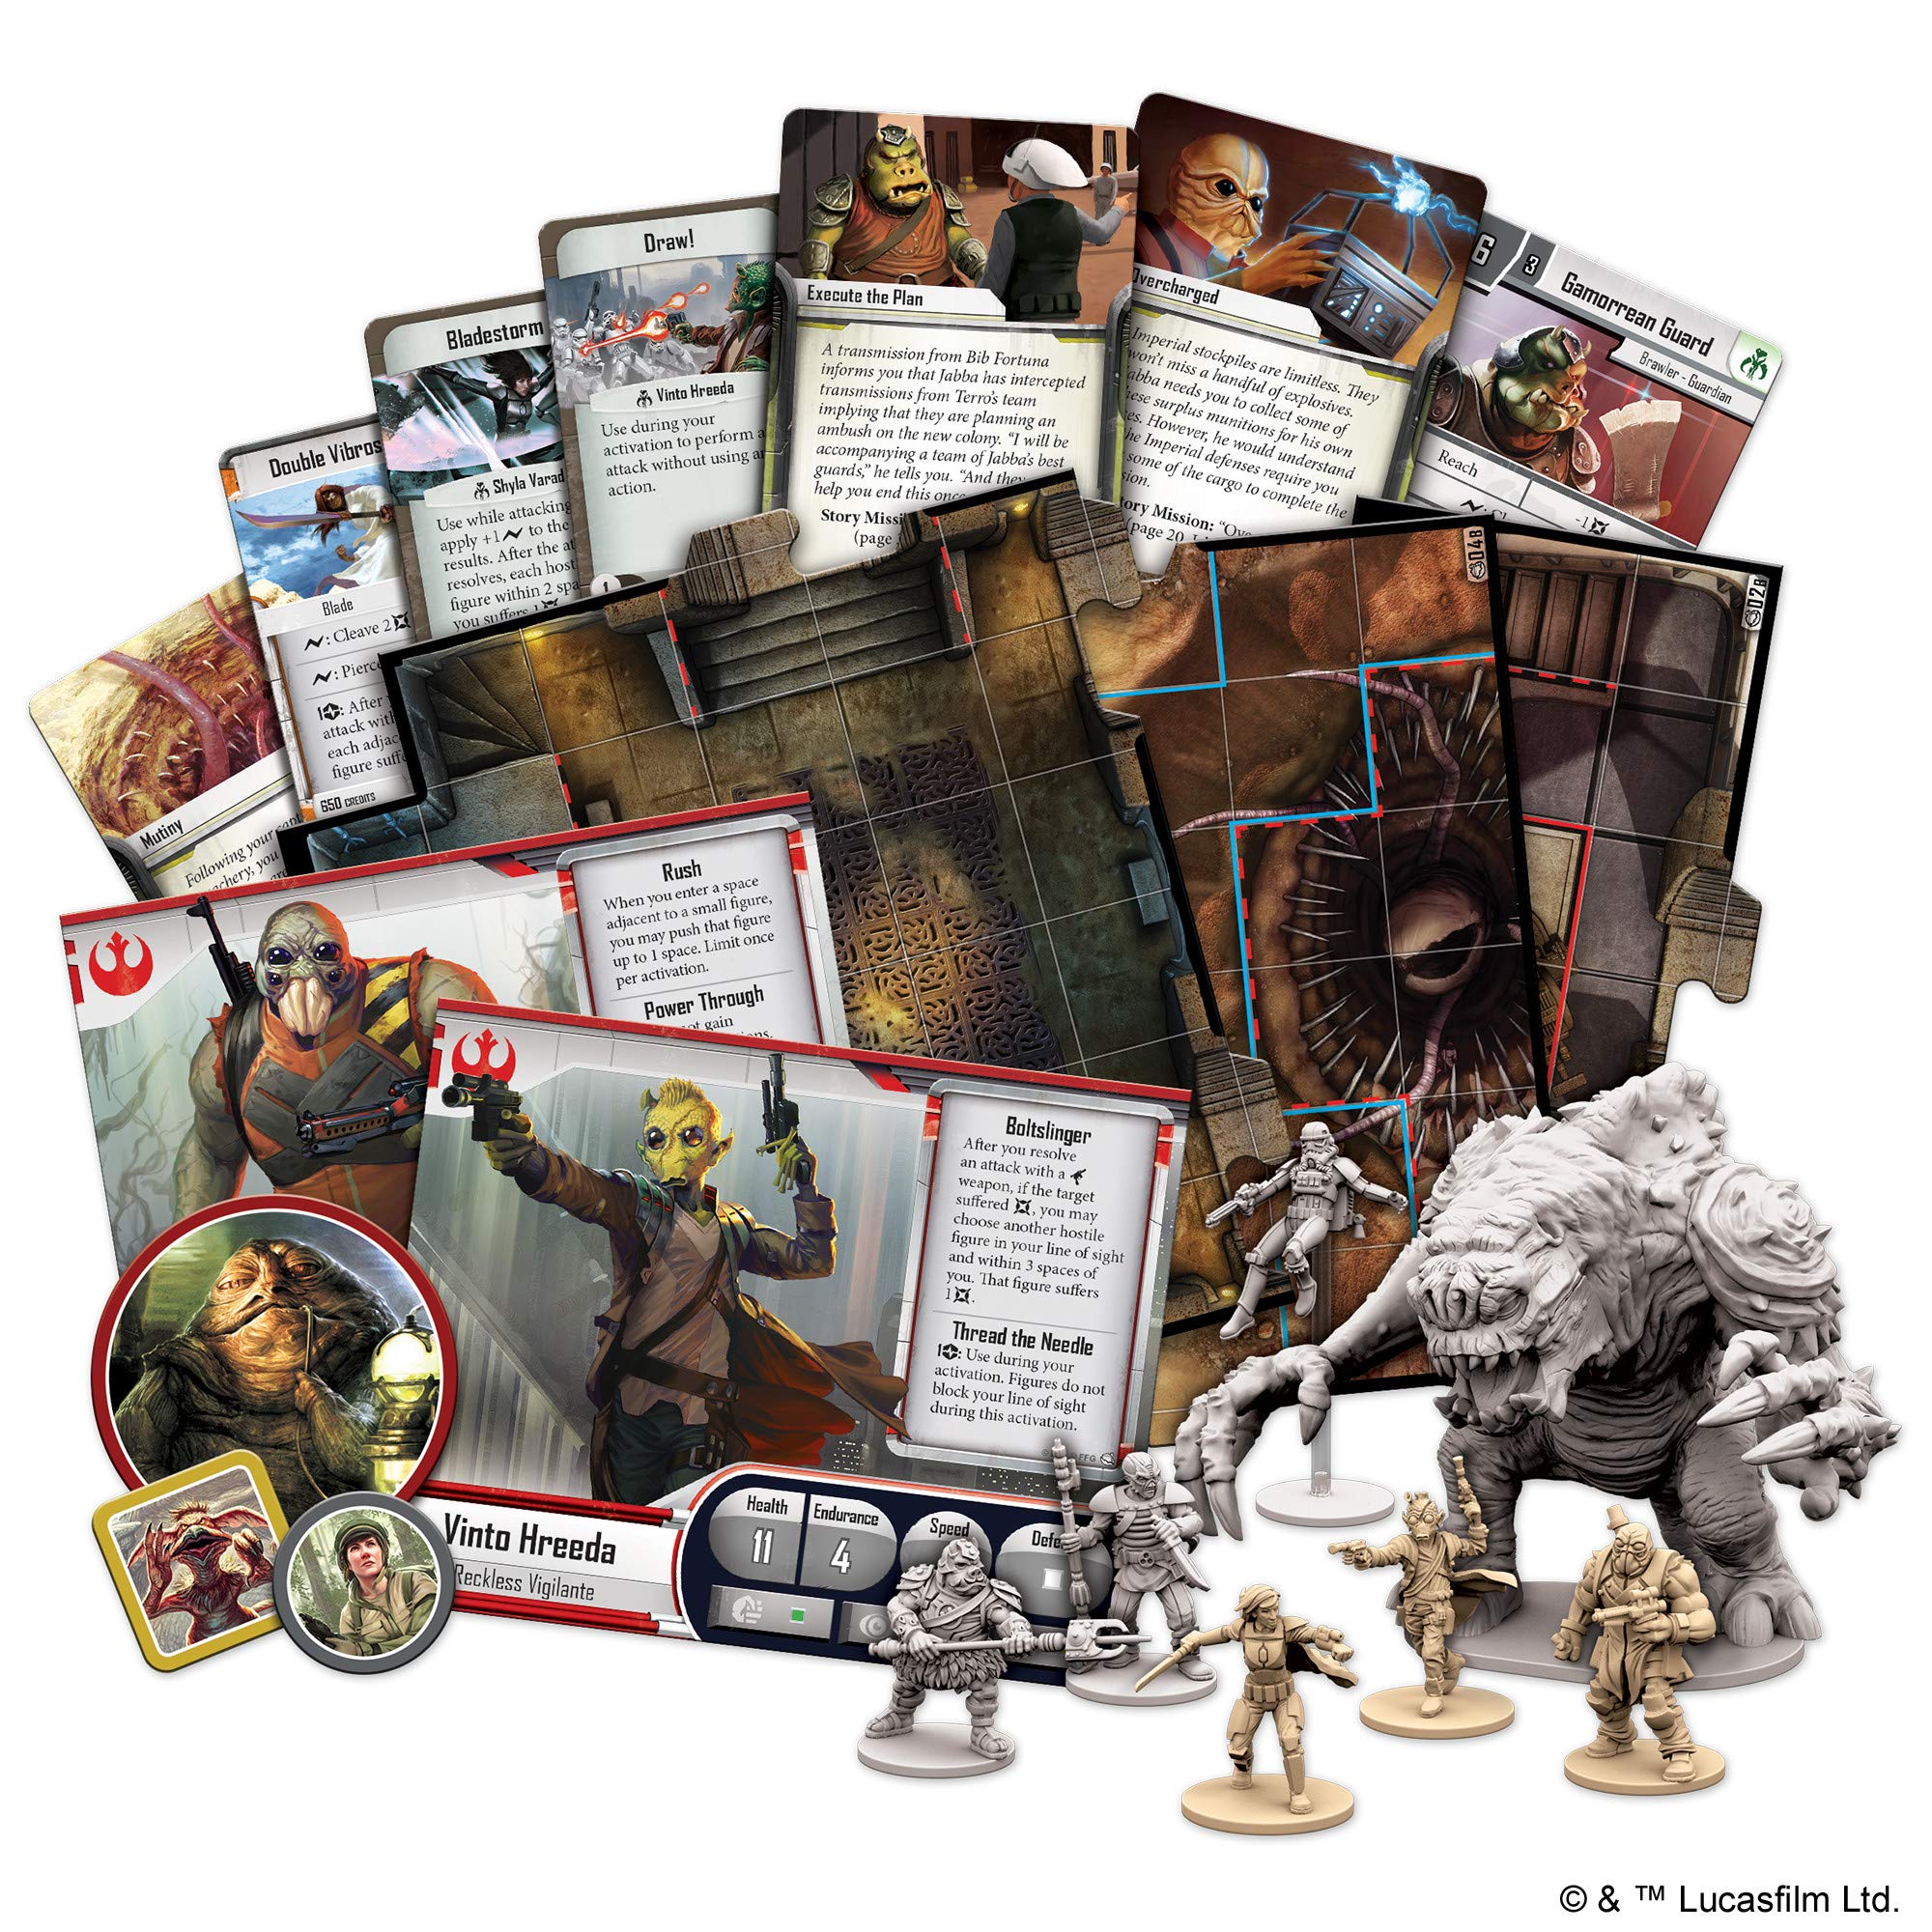 Star Wars Imperial Assault Board Game Jabba's Realm EXPANSION - Epic Sci-Fi Miniatures Strategy Game for Kids and Adults, Ages 14+, 1-5 Players, 1-2 Hour Playtime, Made by Fantasy Flight Games